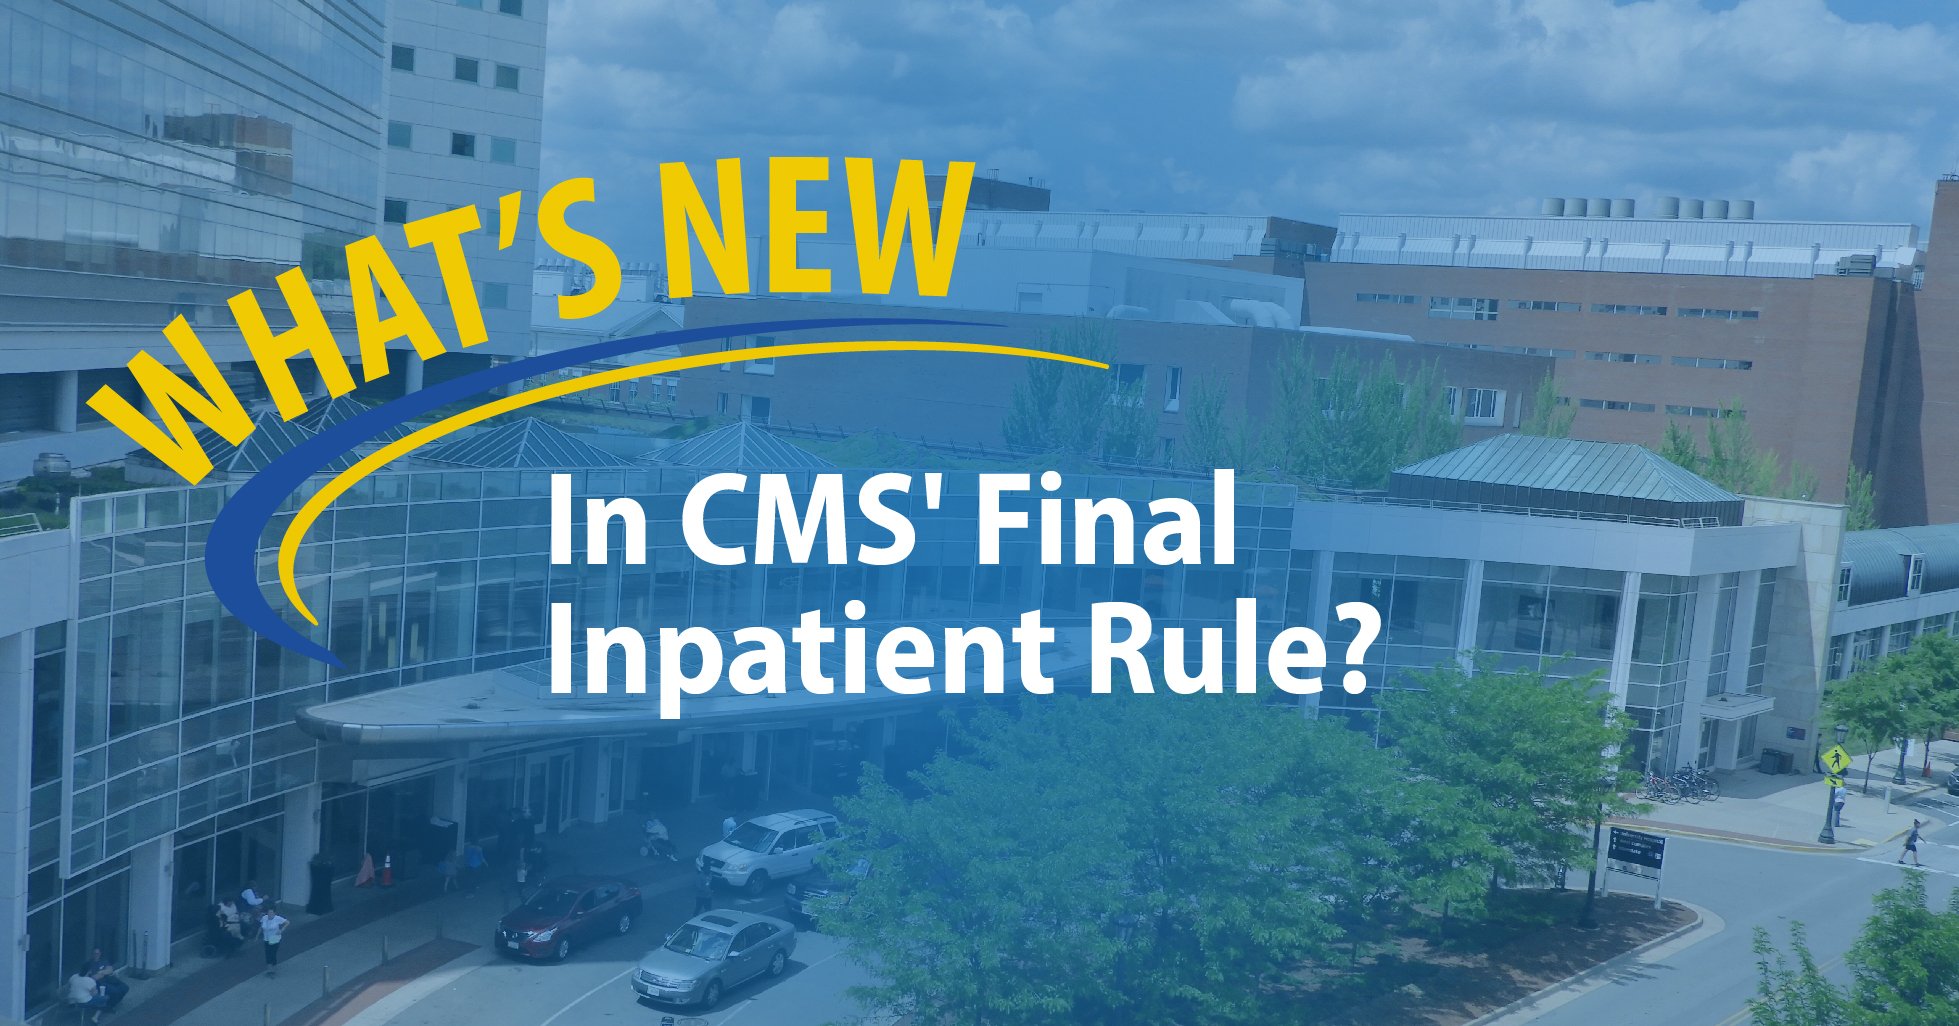 What's New In CMS' Final Inpatient Rule?